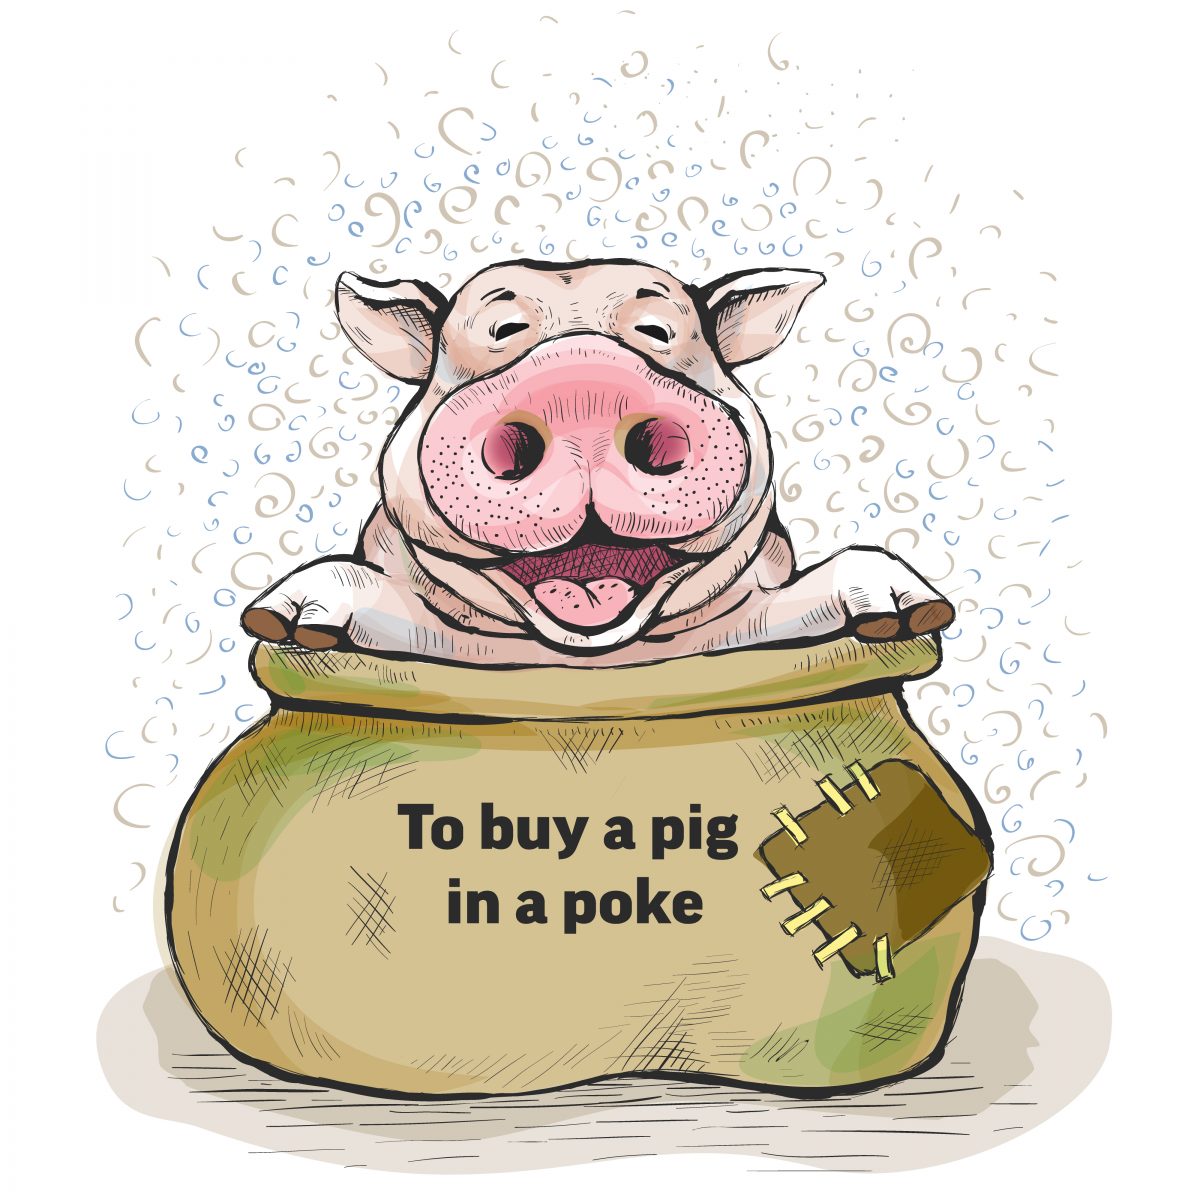 To buy a pig in a poke